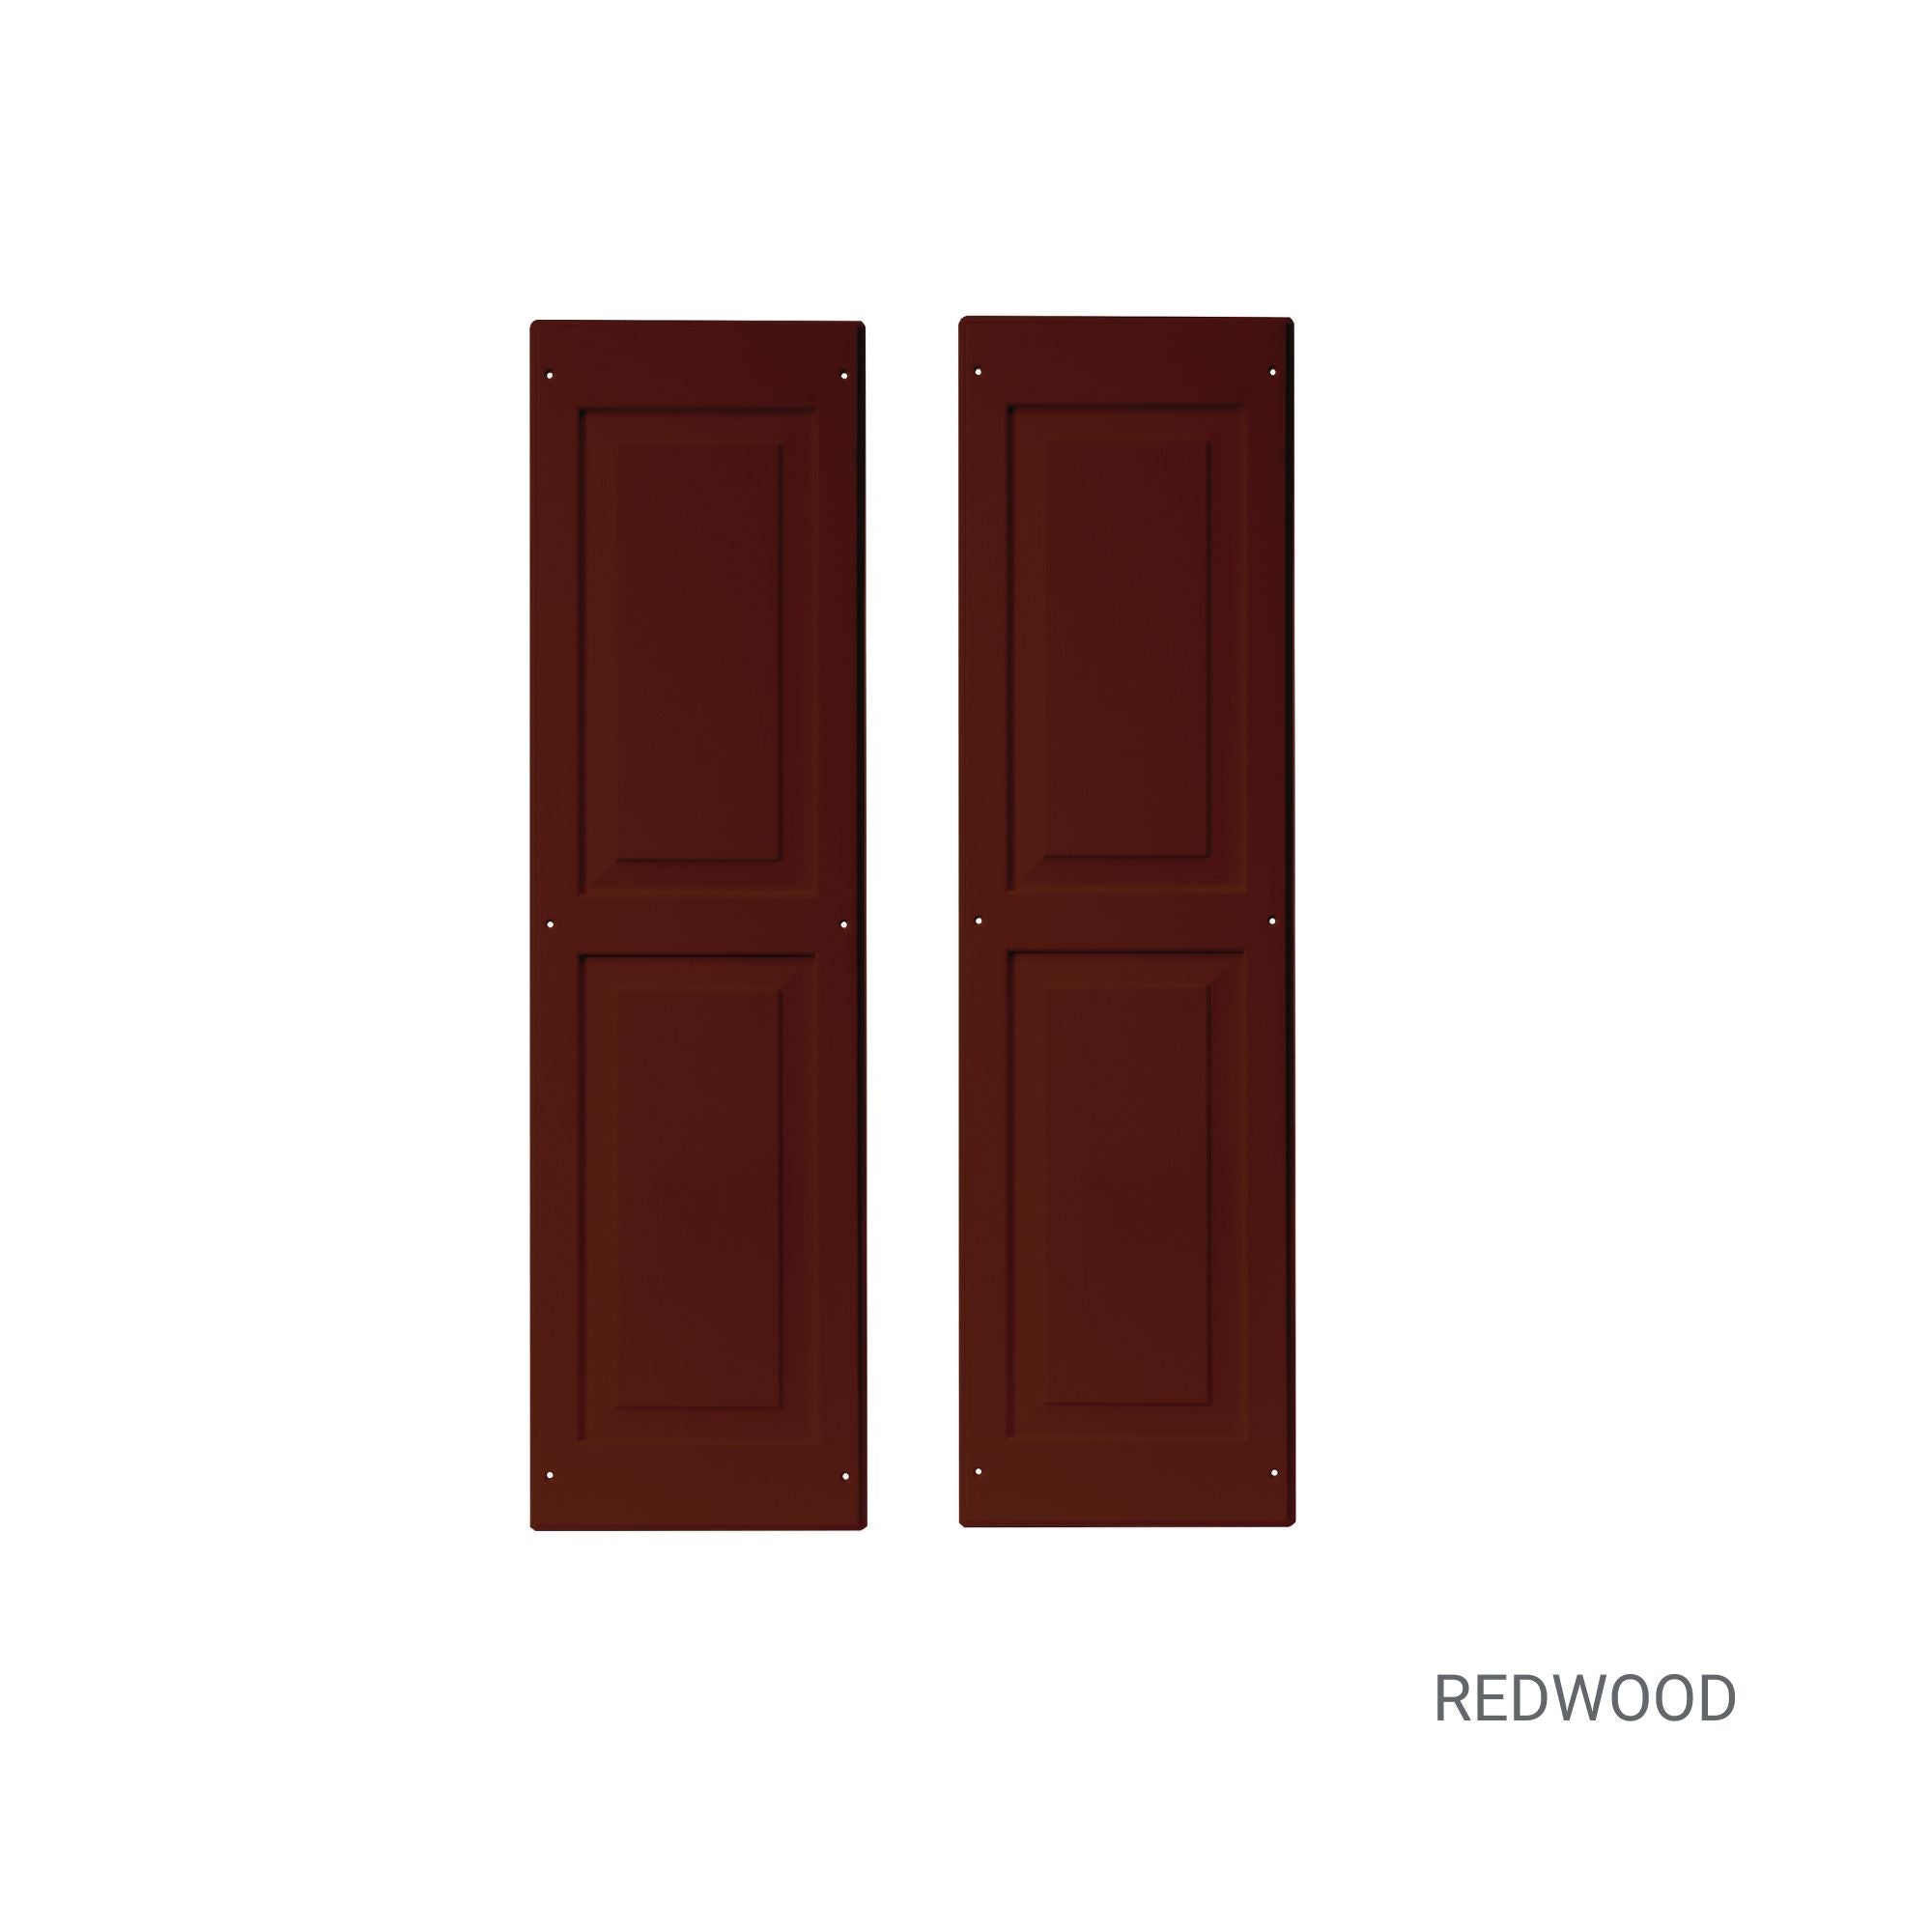 Pair of 12" W x 43" H Raised Panel Redwood Shutters for Sheds, Playhouses, and MORE